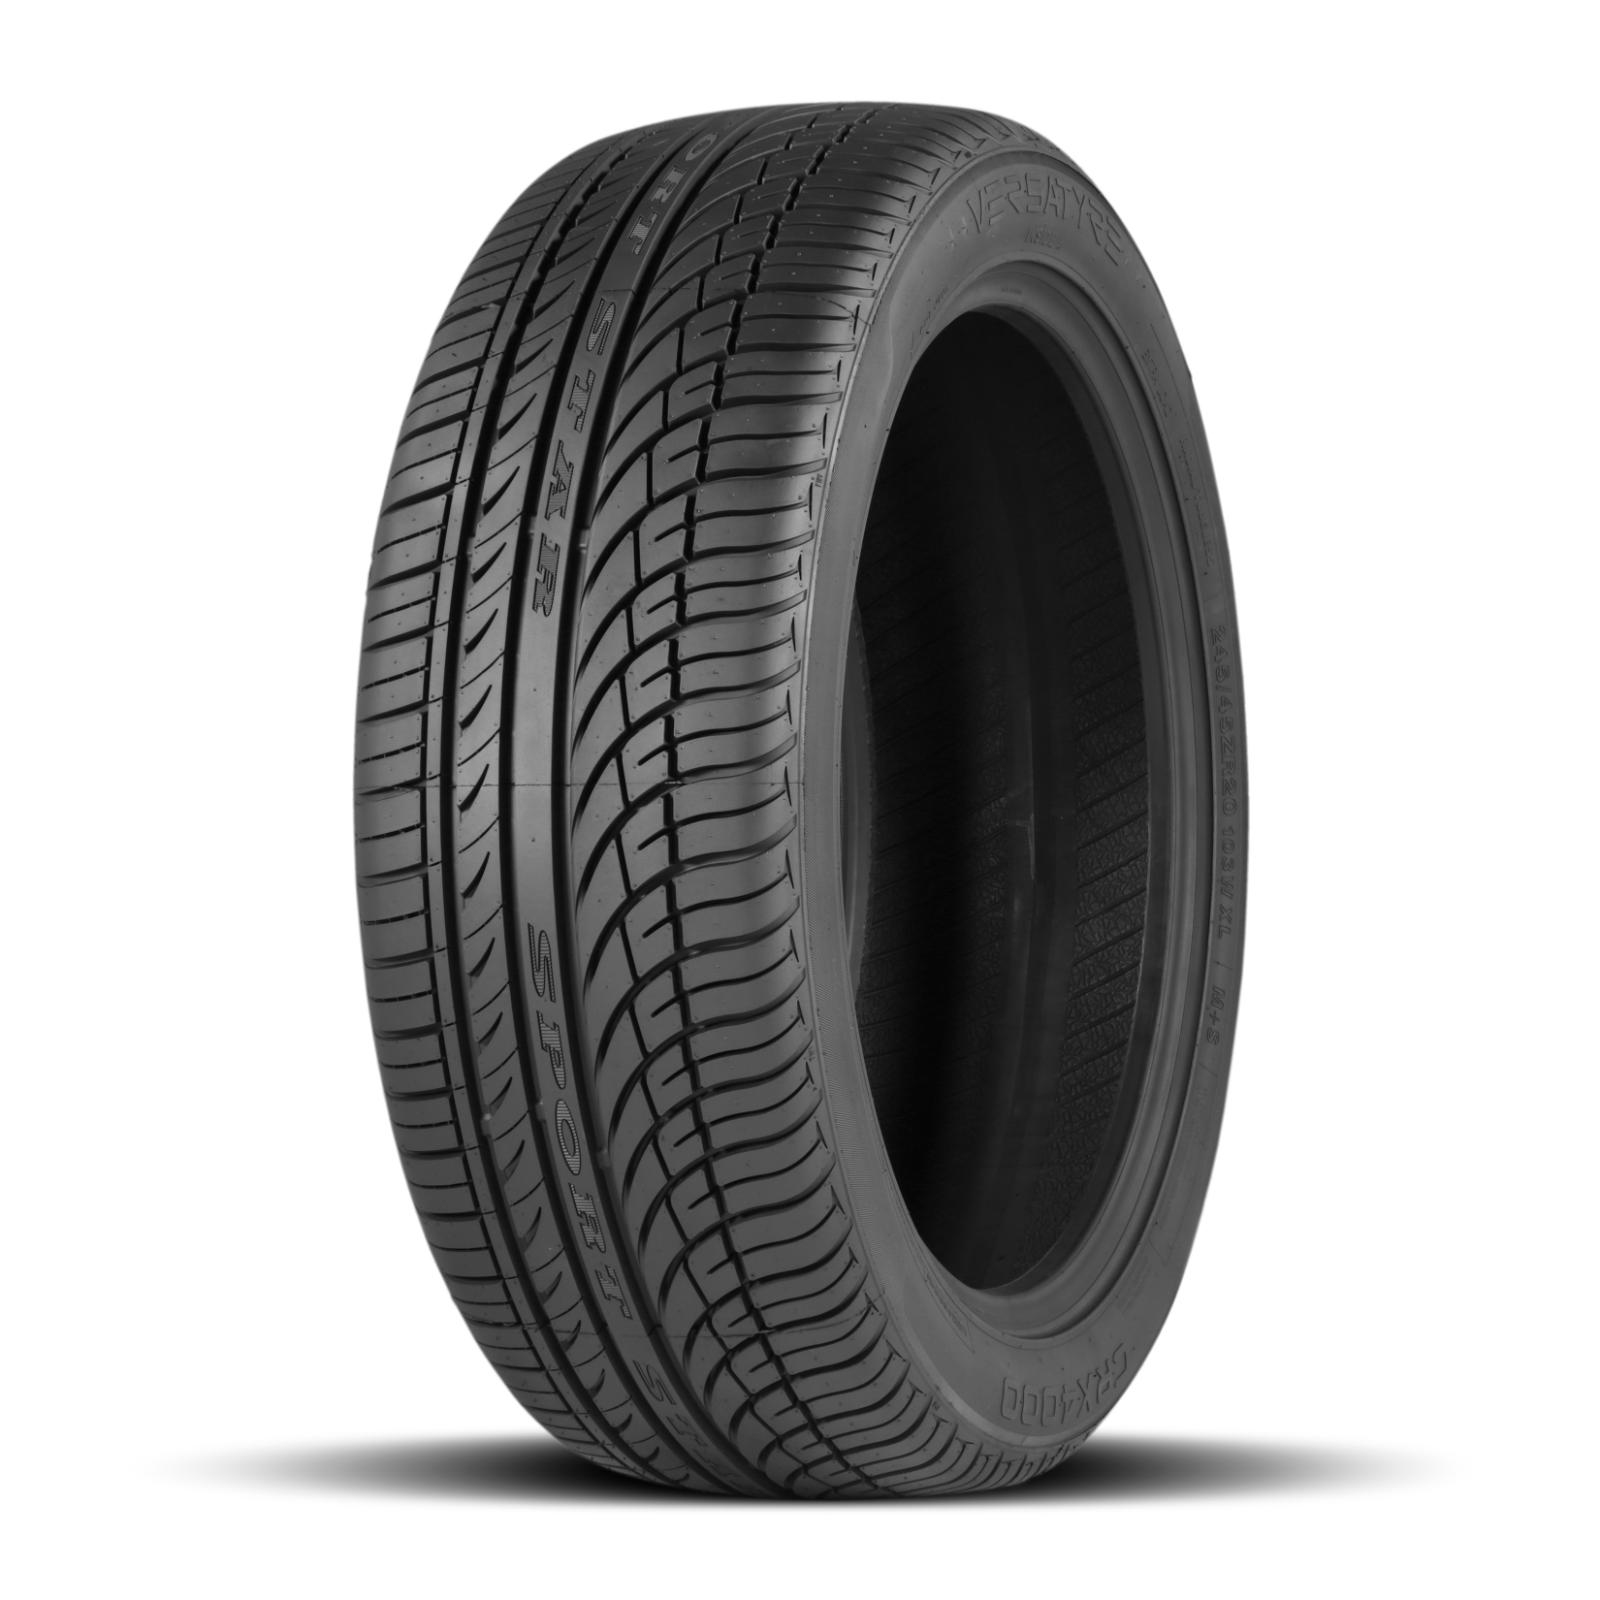 Primary image for 255/50R20 VERSATYRE CRX4000 109V XL M+S